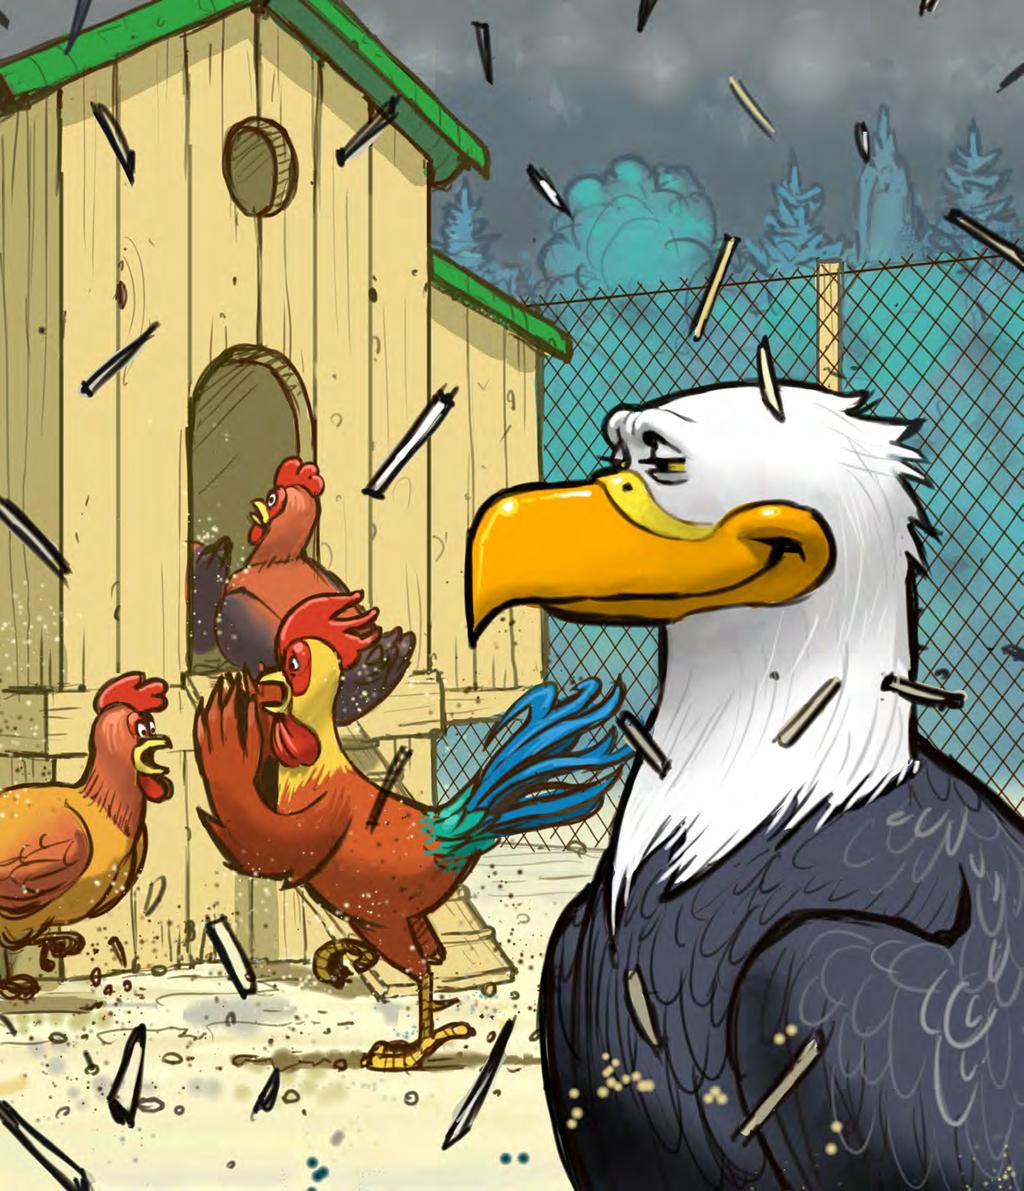 One day a mighty wind storm ripped across the barnyard. Run inside! shouted the rooster.